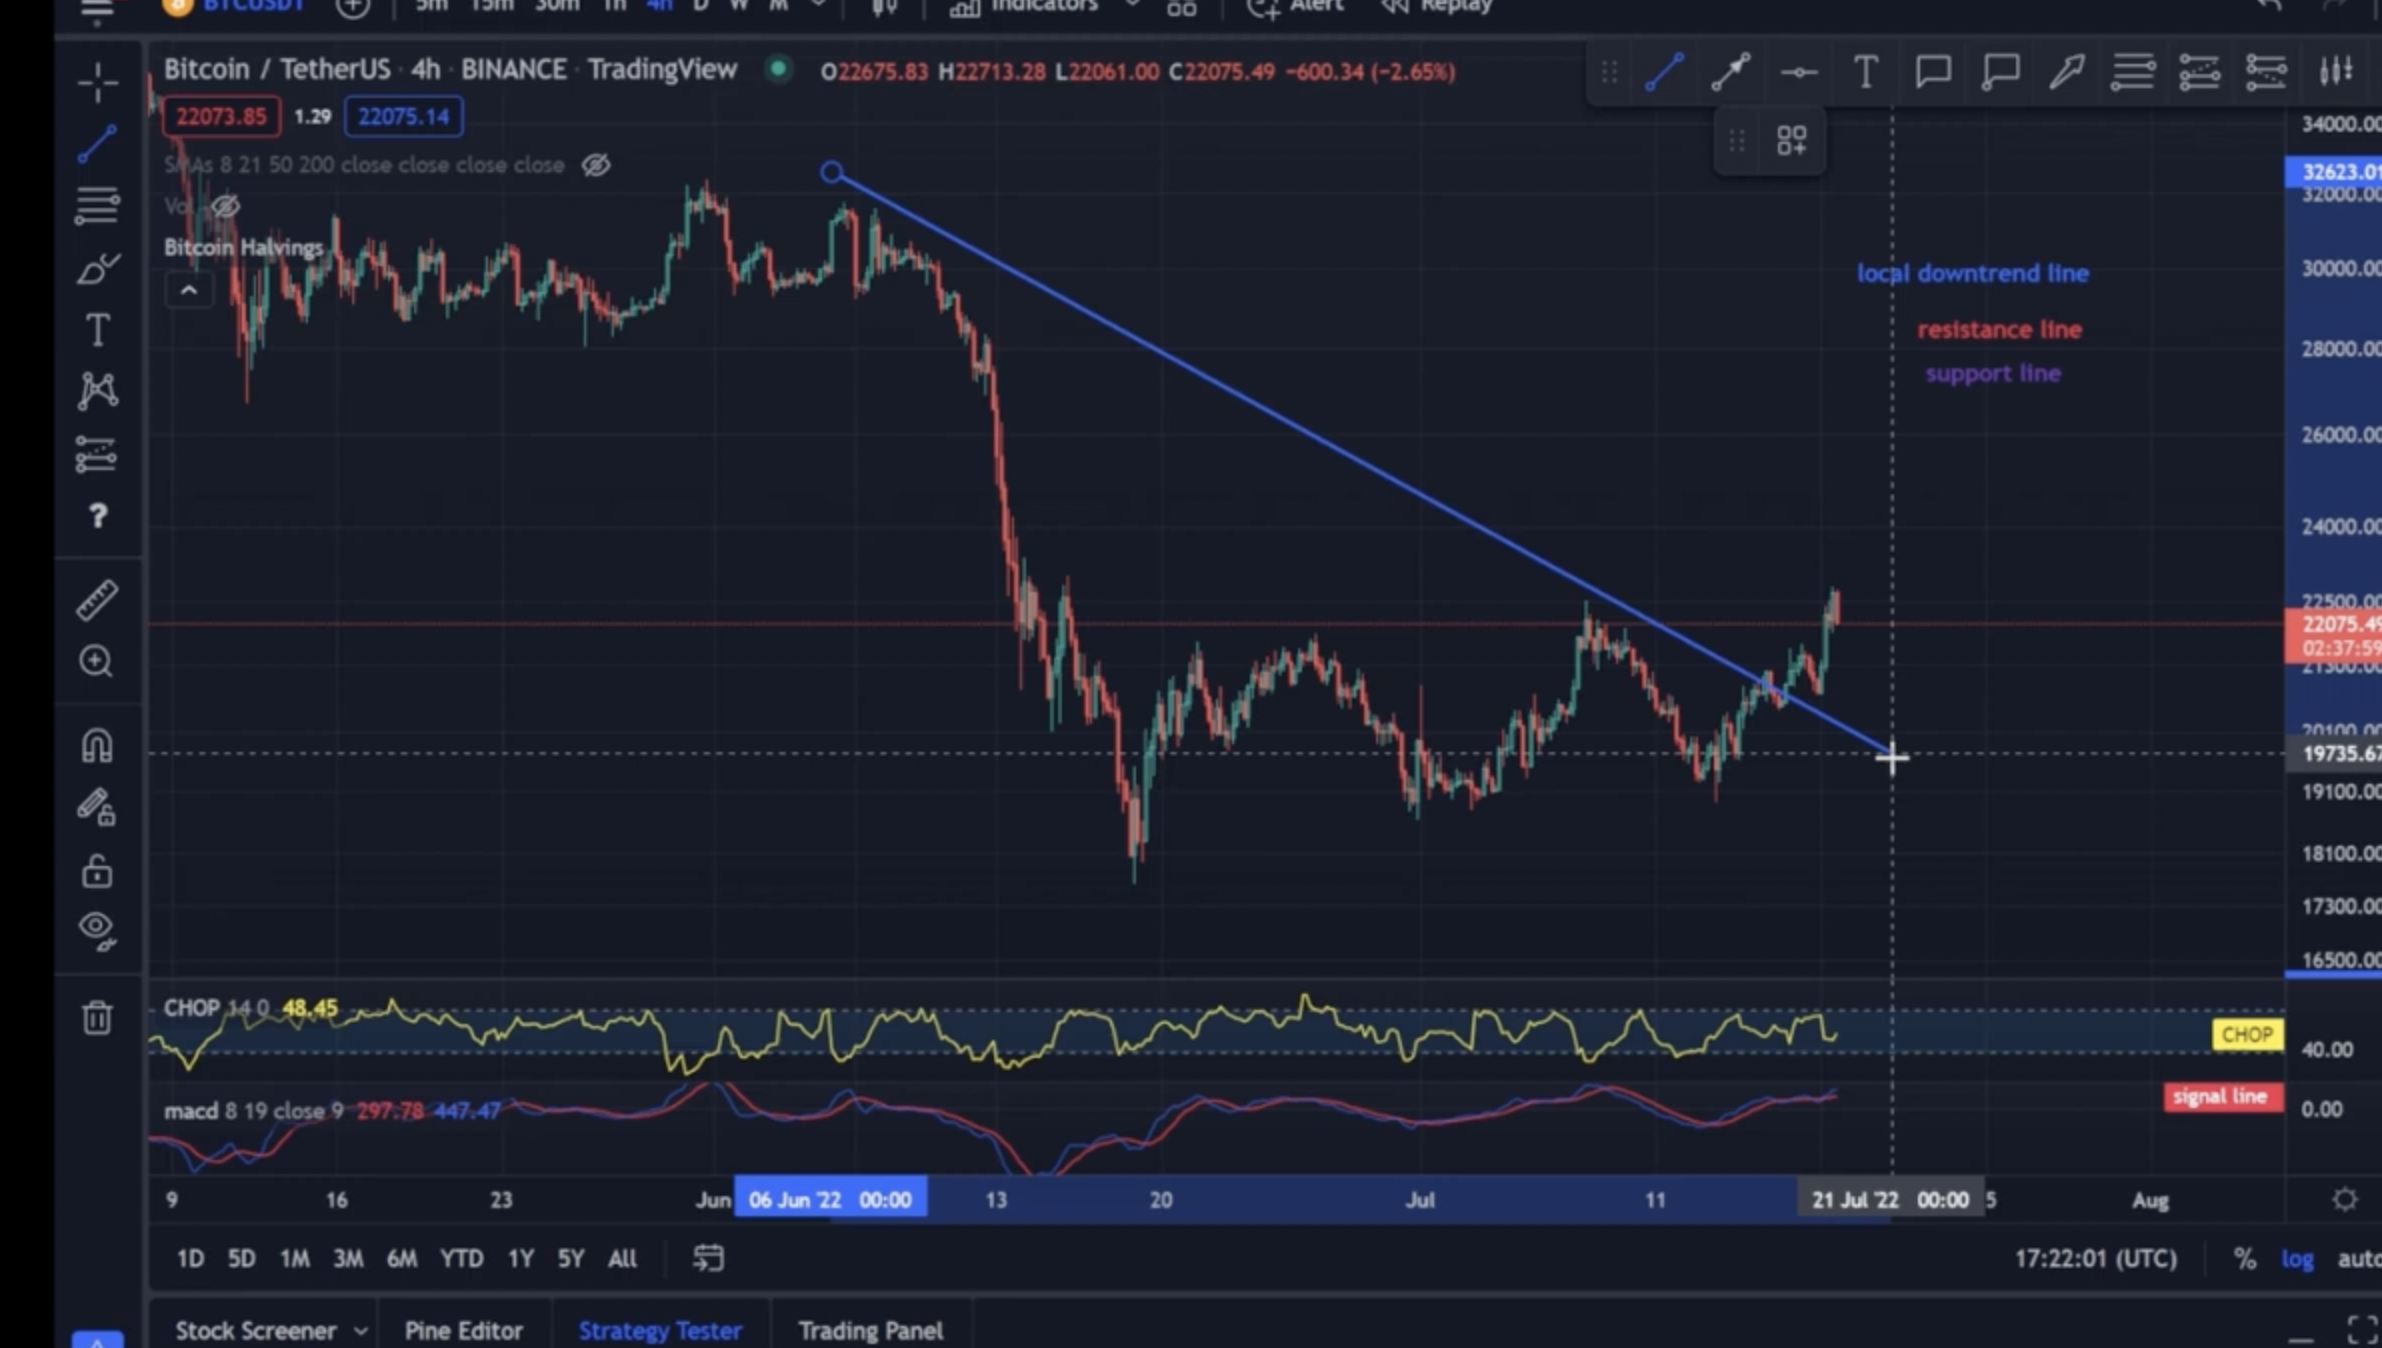 Hello everyone, let's take a look at the BTC to USDT chart over the 4 hour timeframe on 19.07.2022